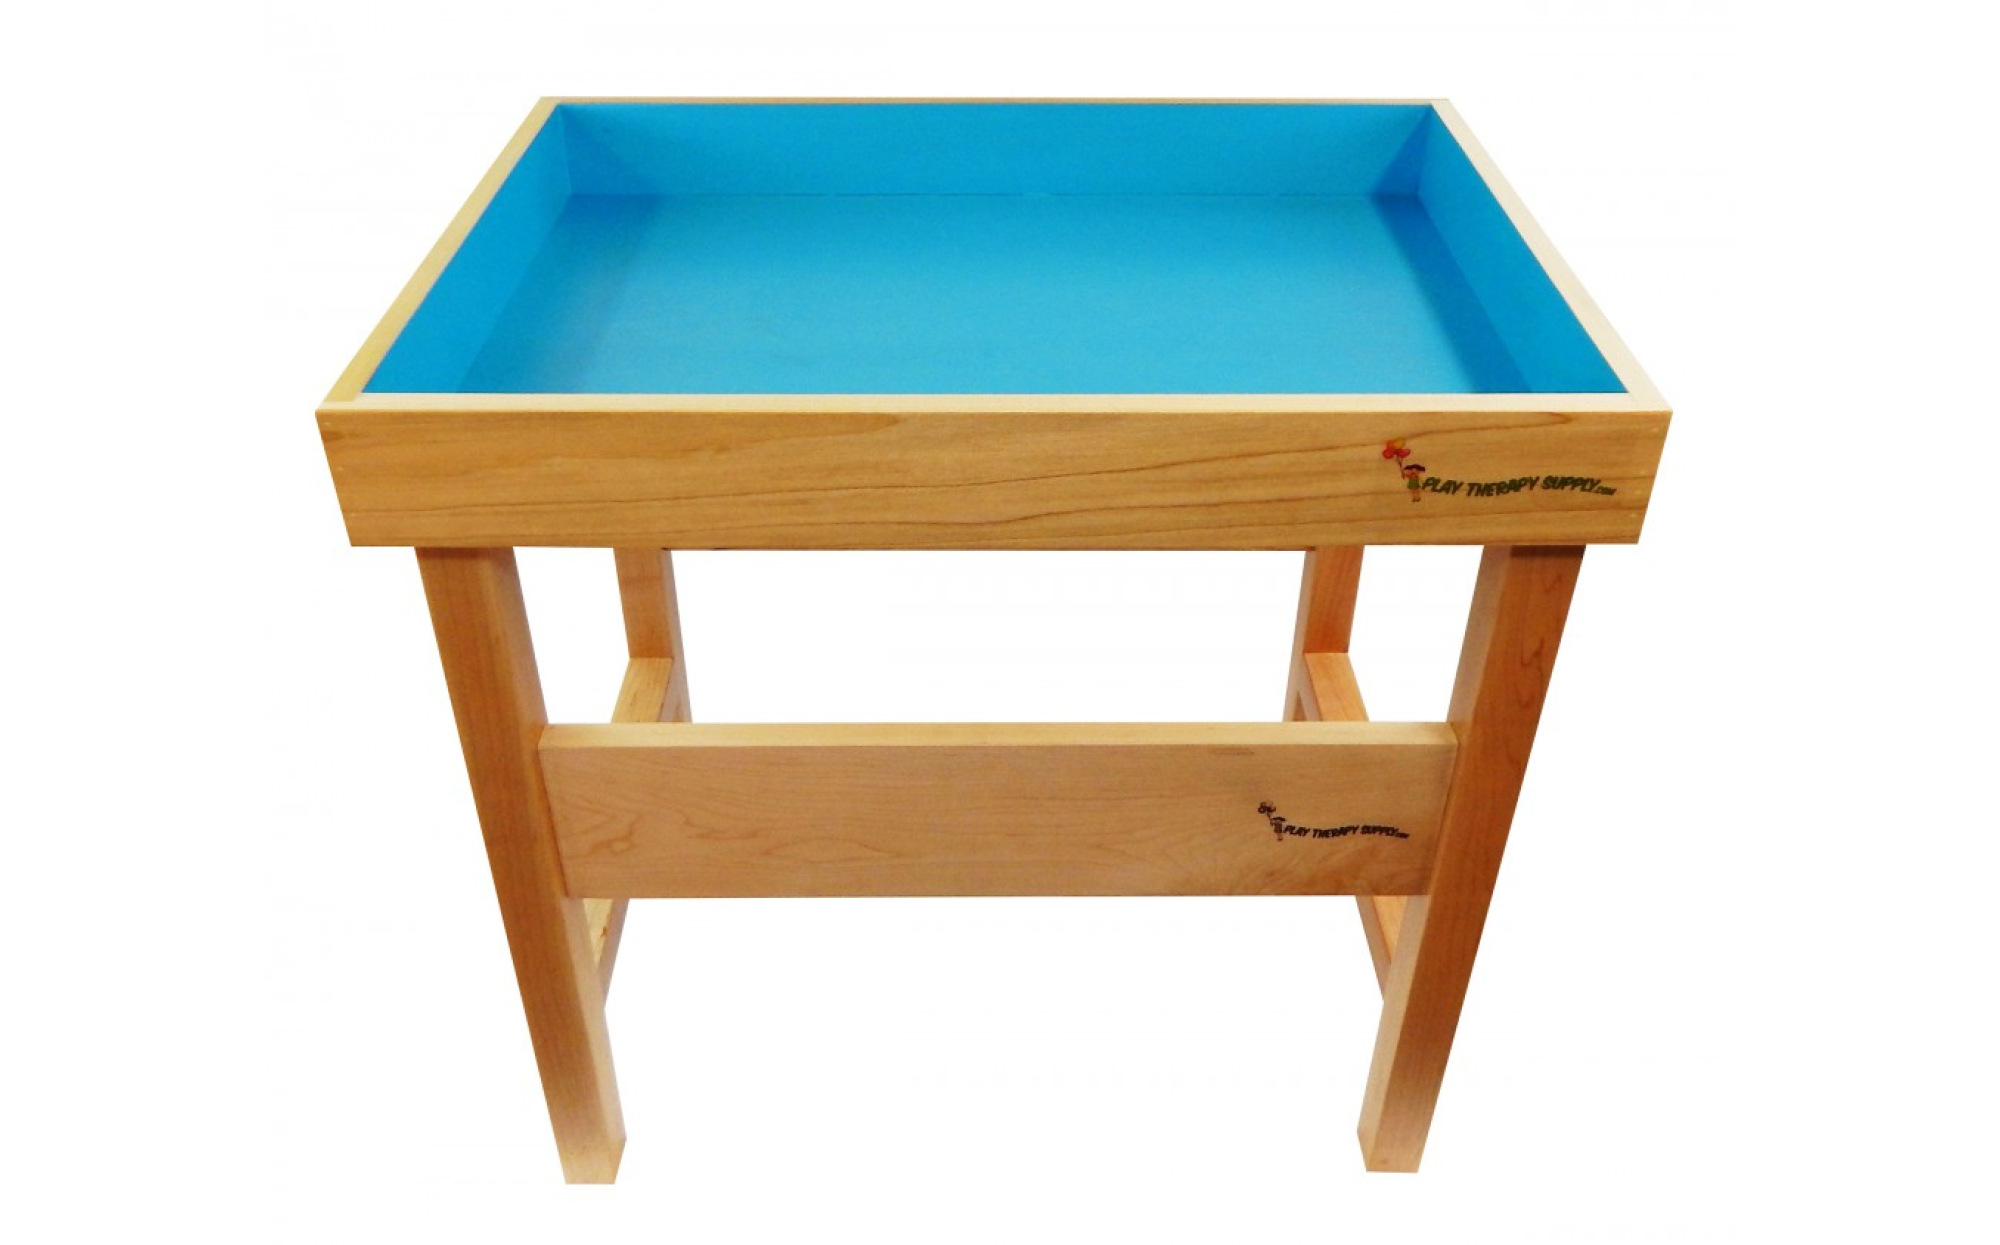 Portable Sandtray Play Therapy 